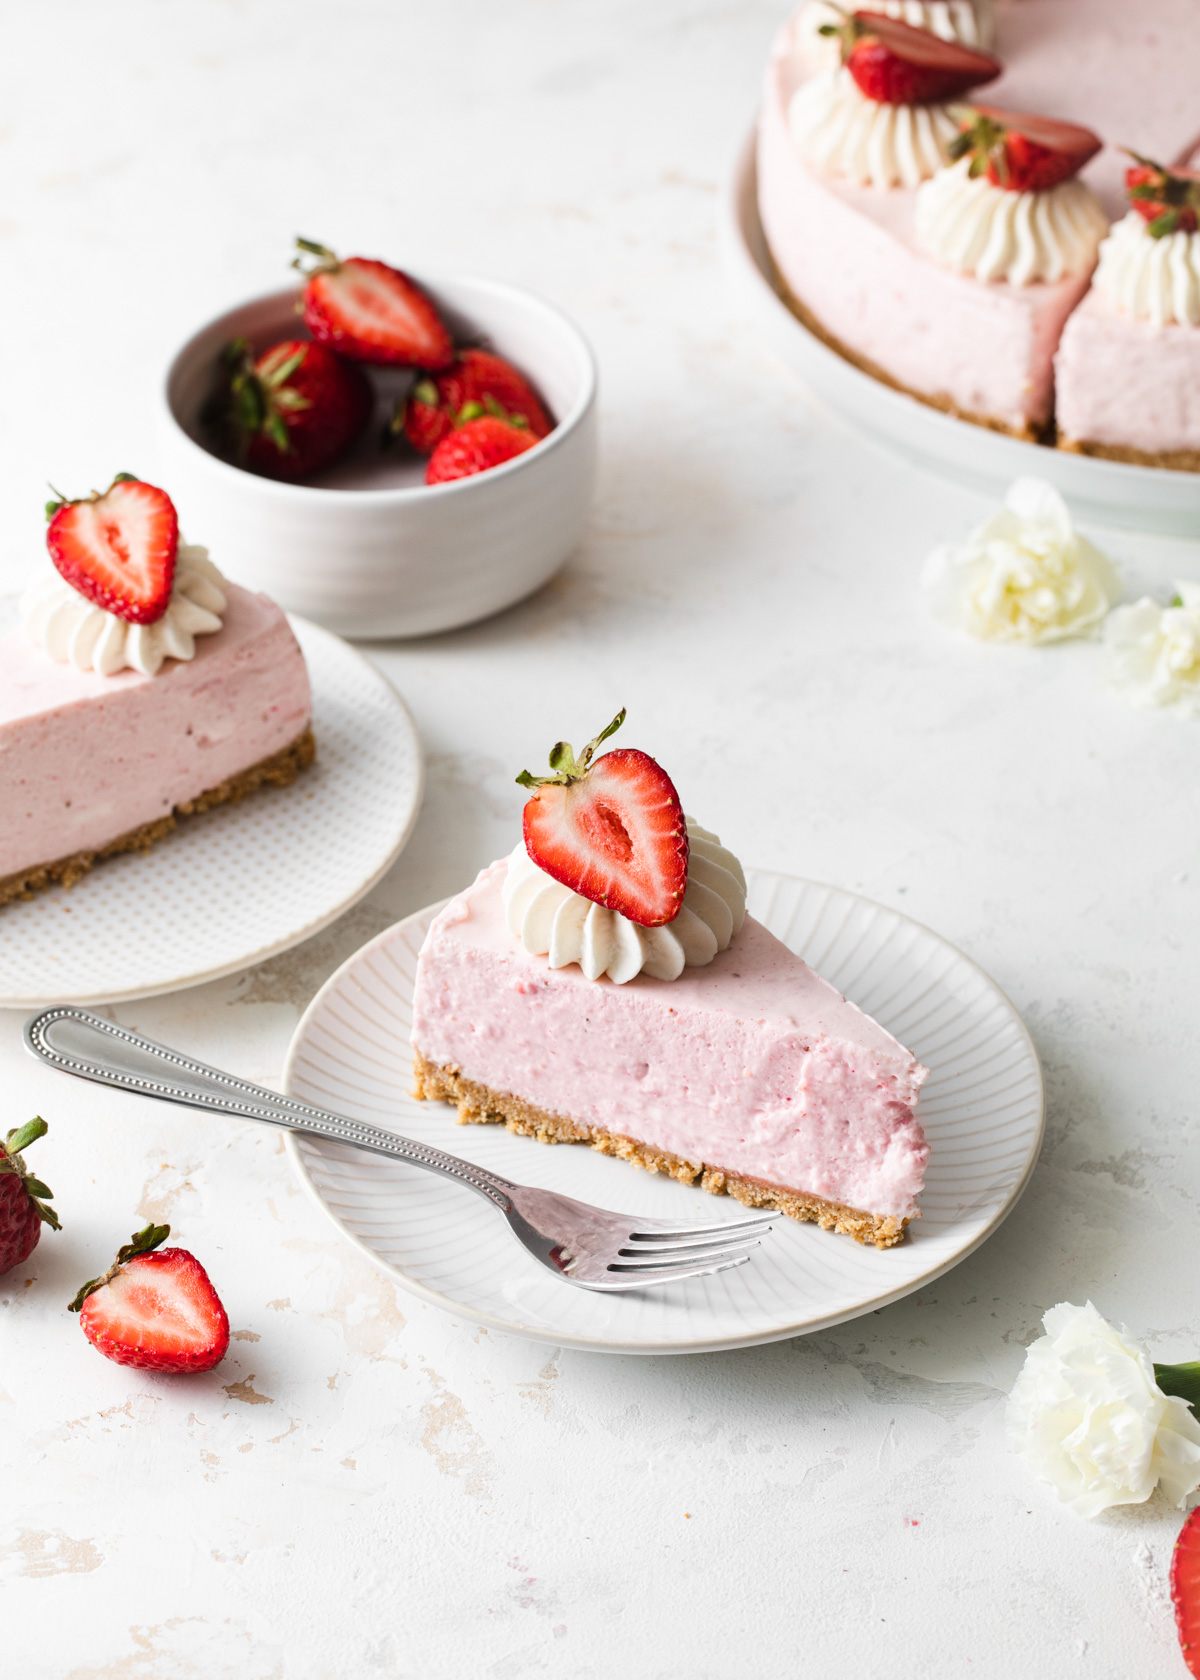 A slice of no-bake strawberry cheese with a fresh strawberry on top